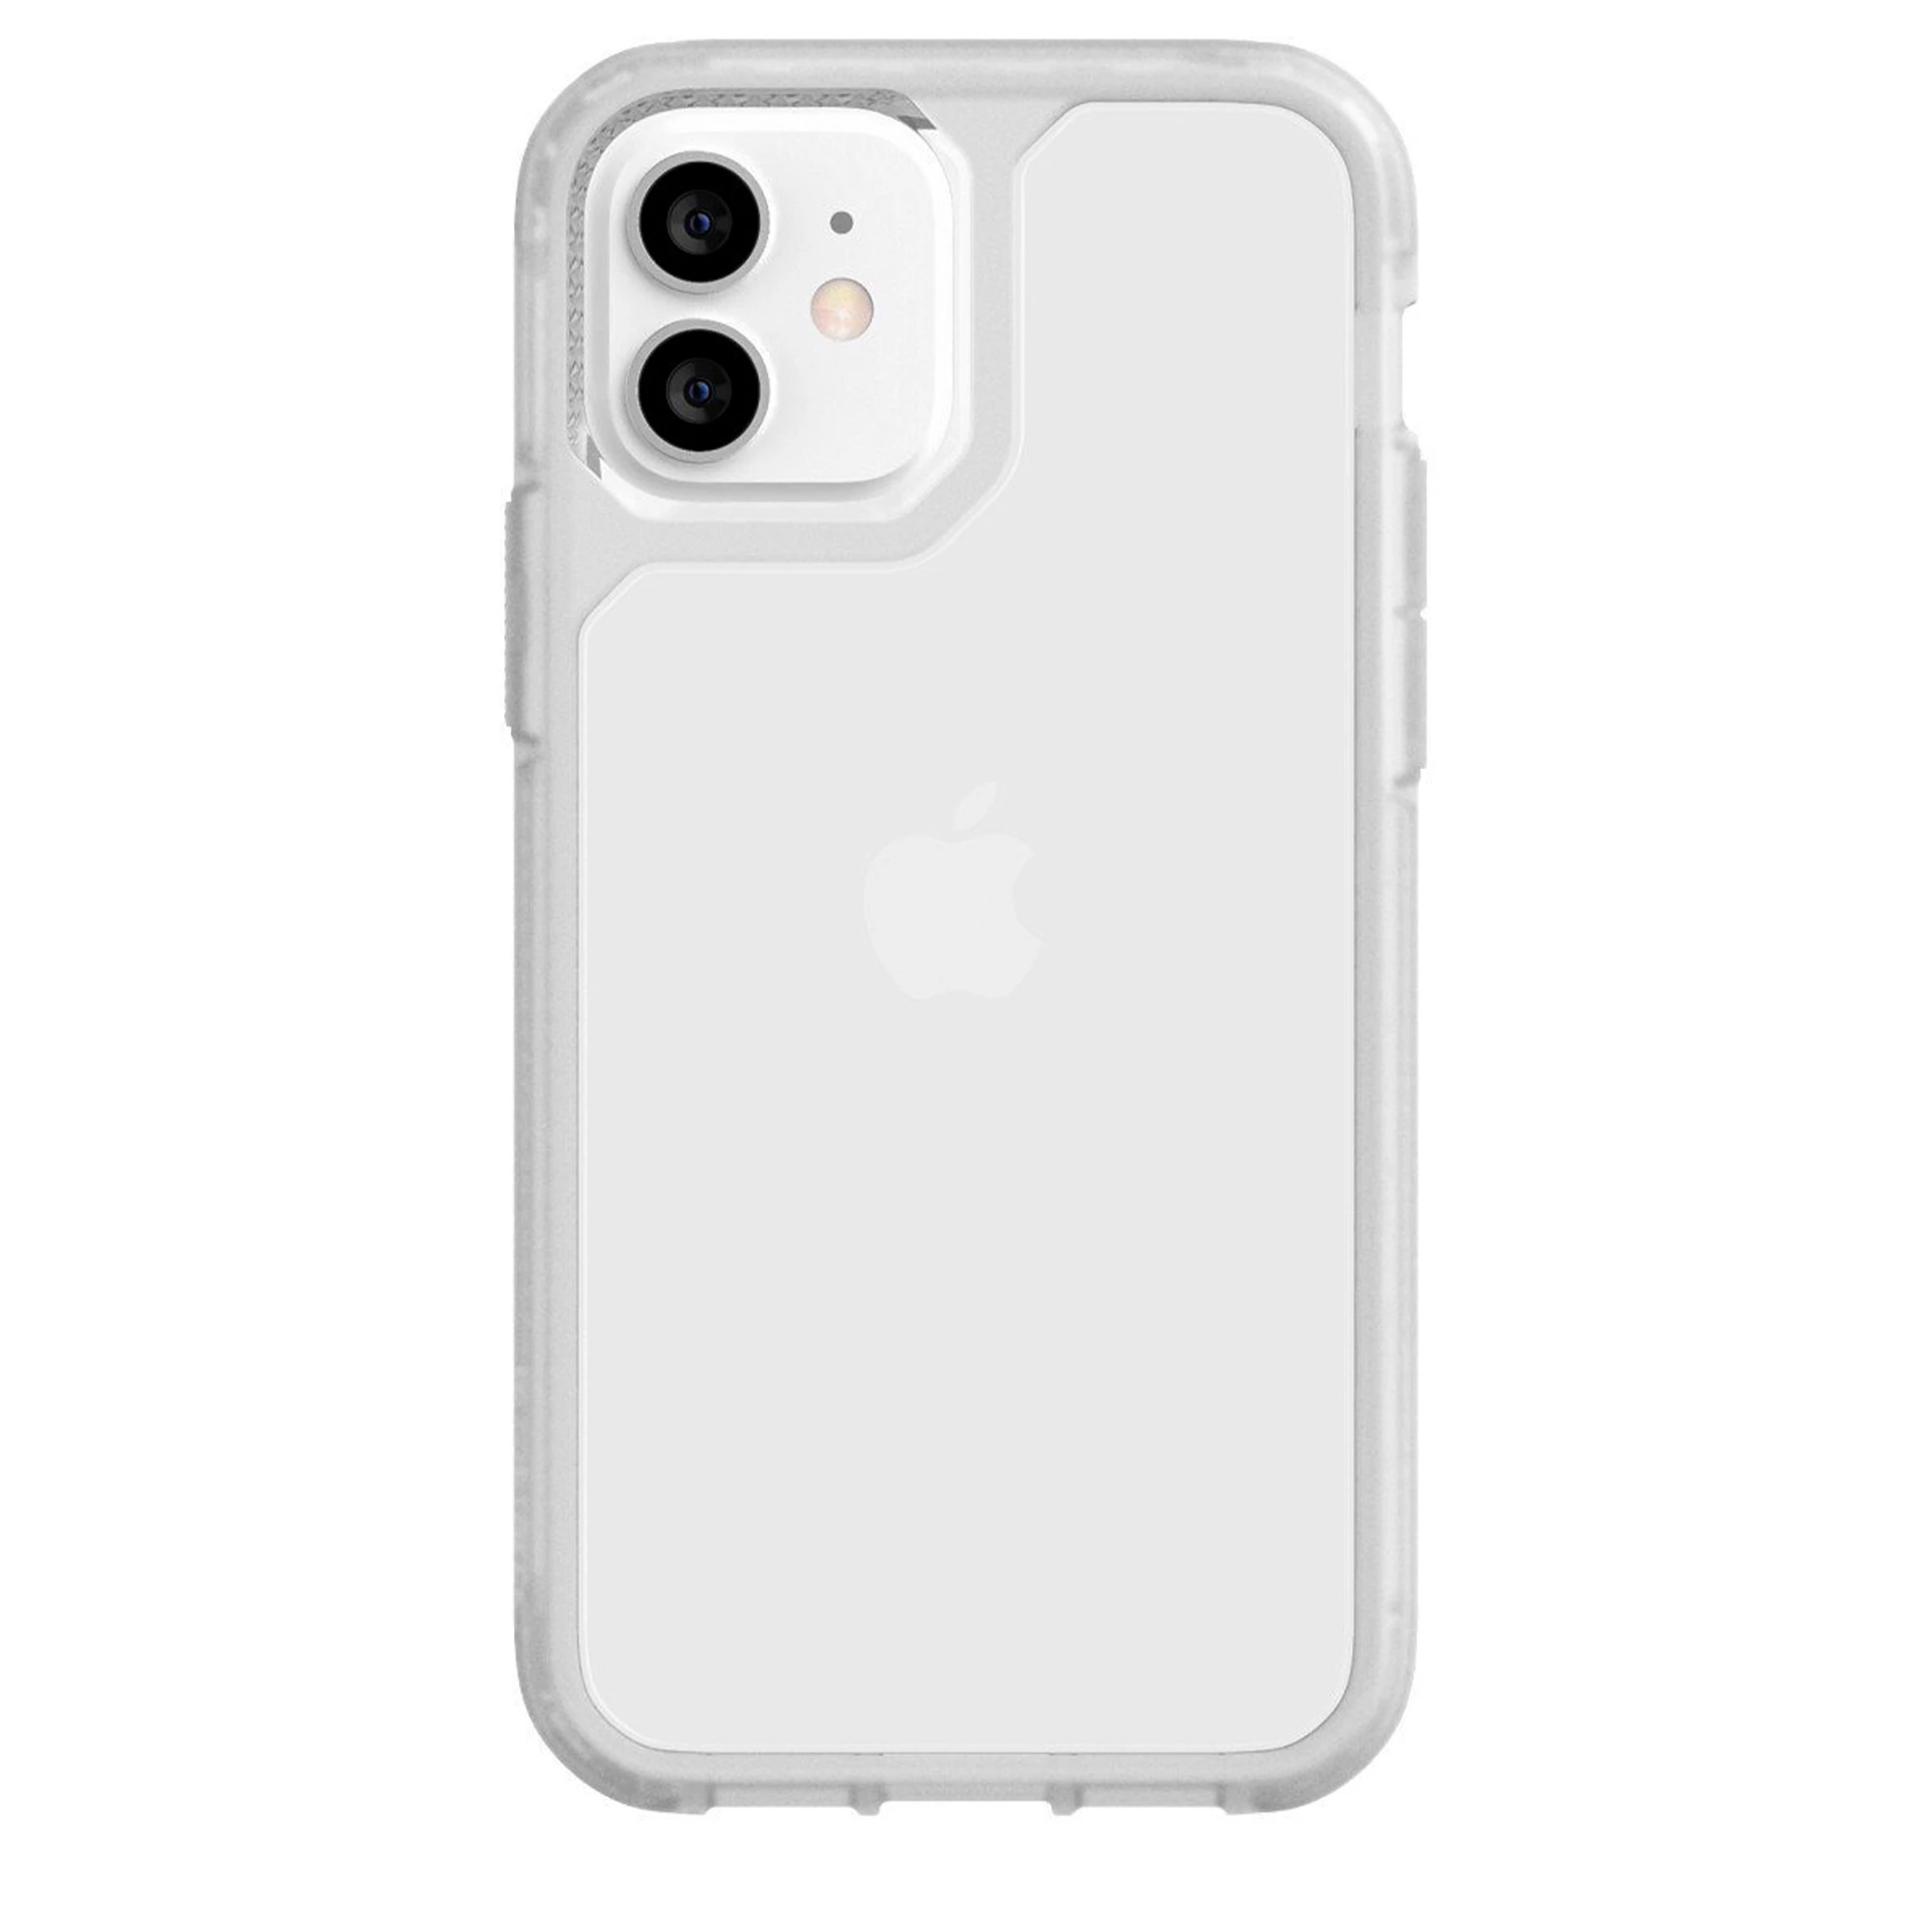 Griffin Survivor Strong for iPhone 12 mini - Clear (GIP-046-CLR)